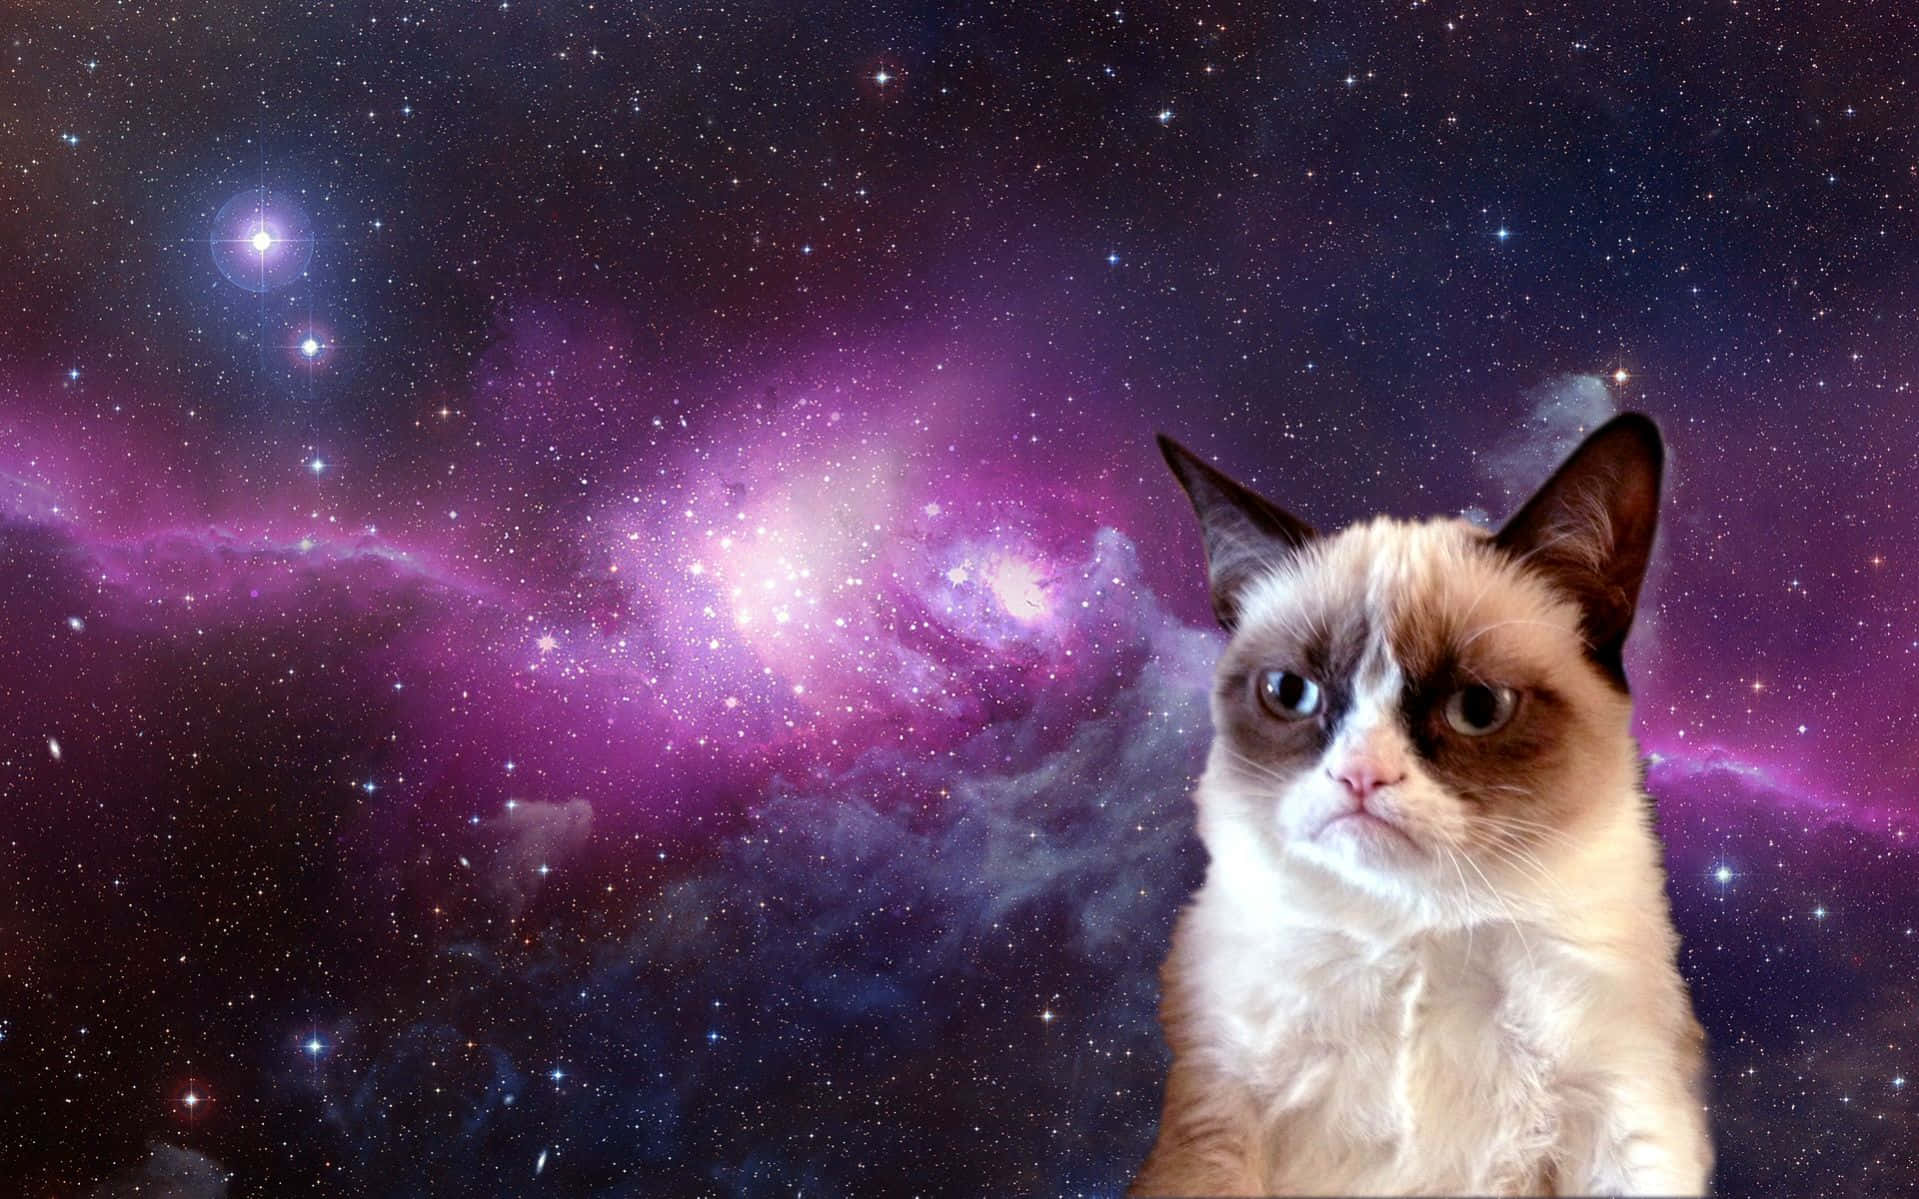 A Playful Grumpy Cat Displaying Its Usual Annoyed Expression Wallpaper